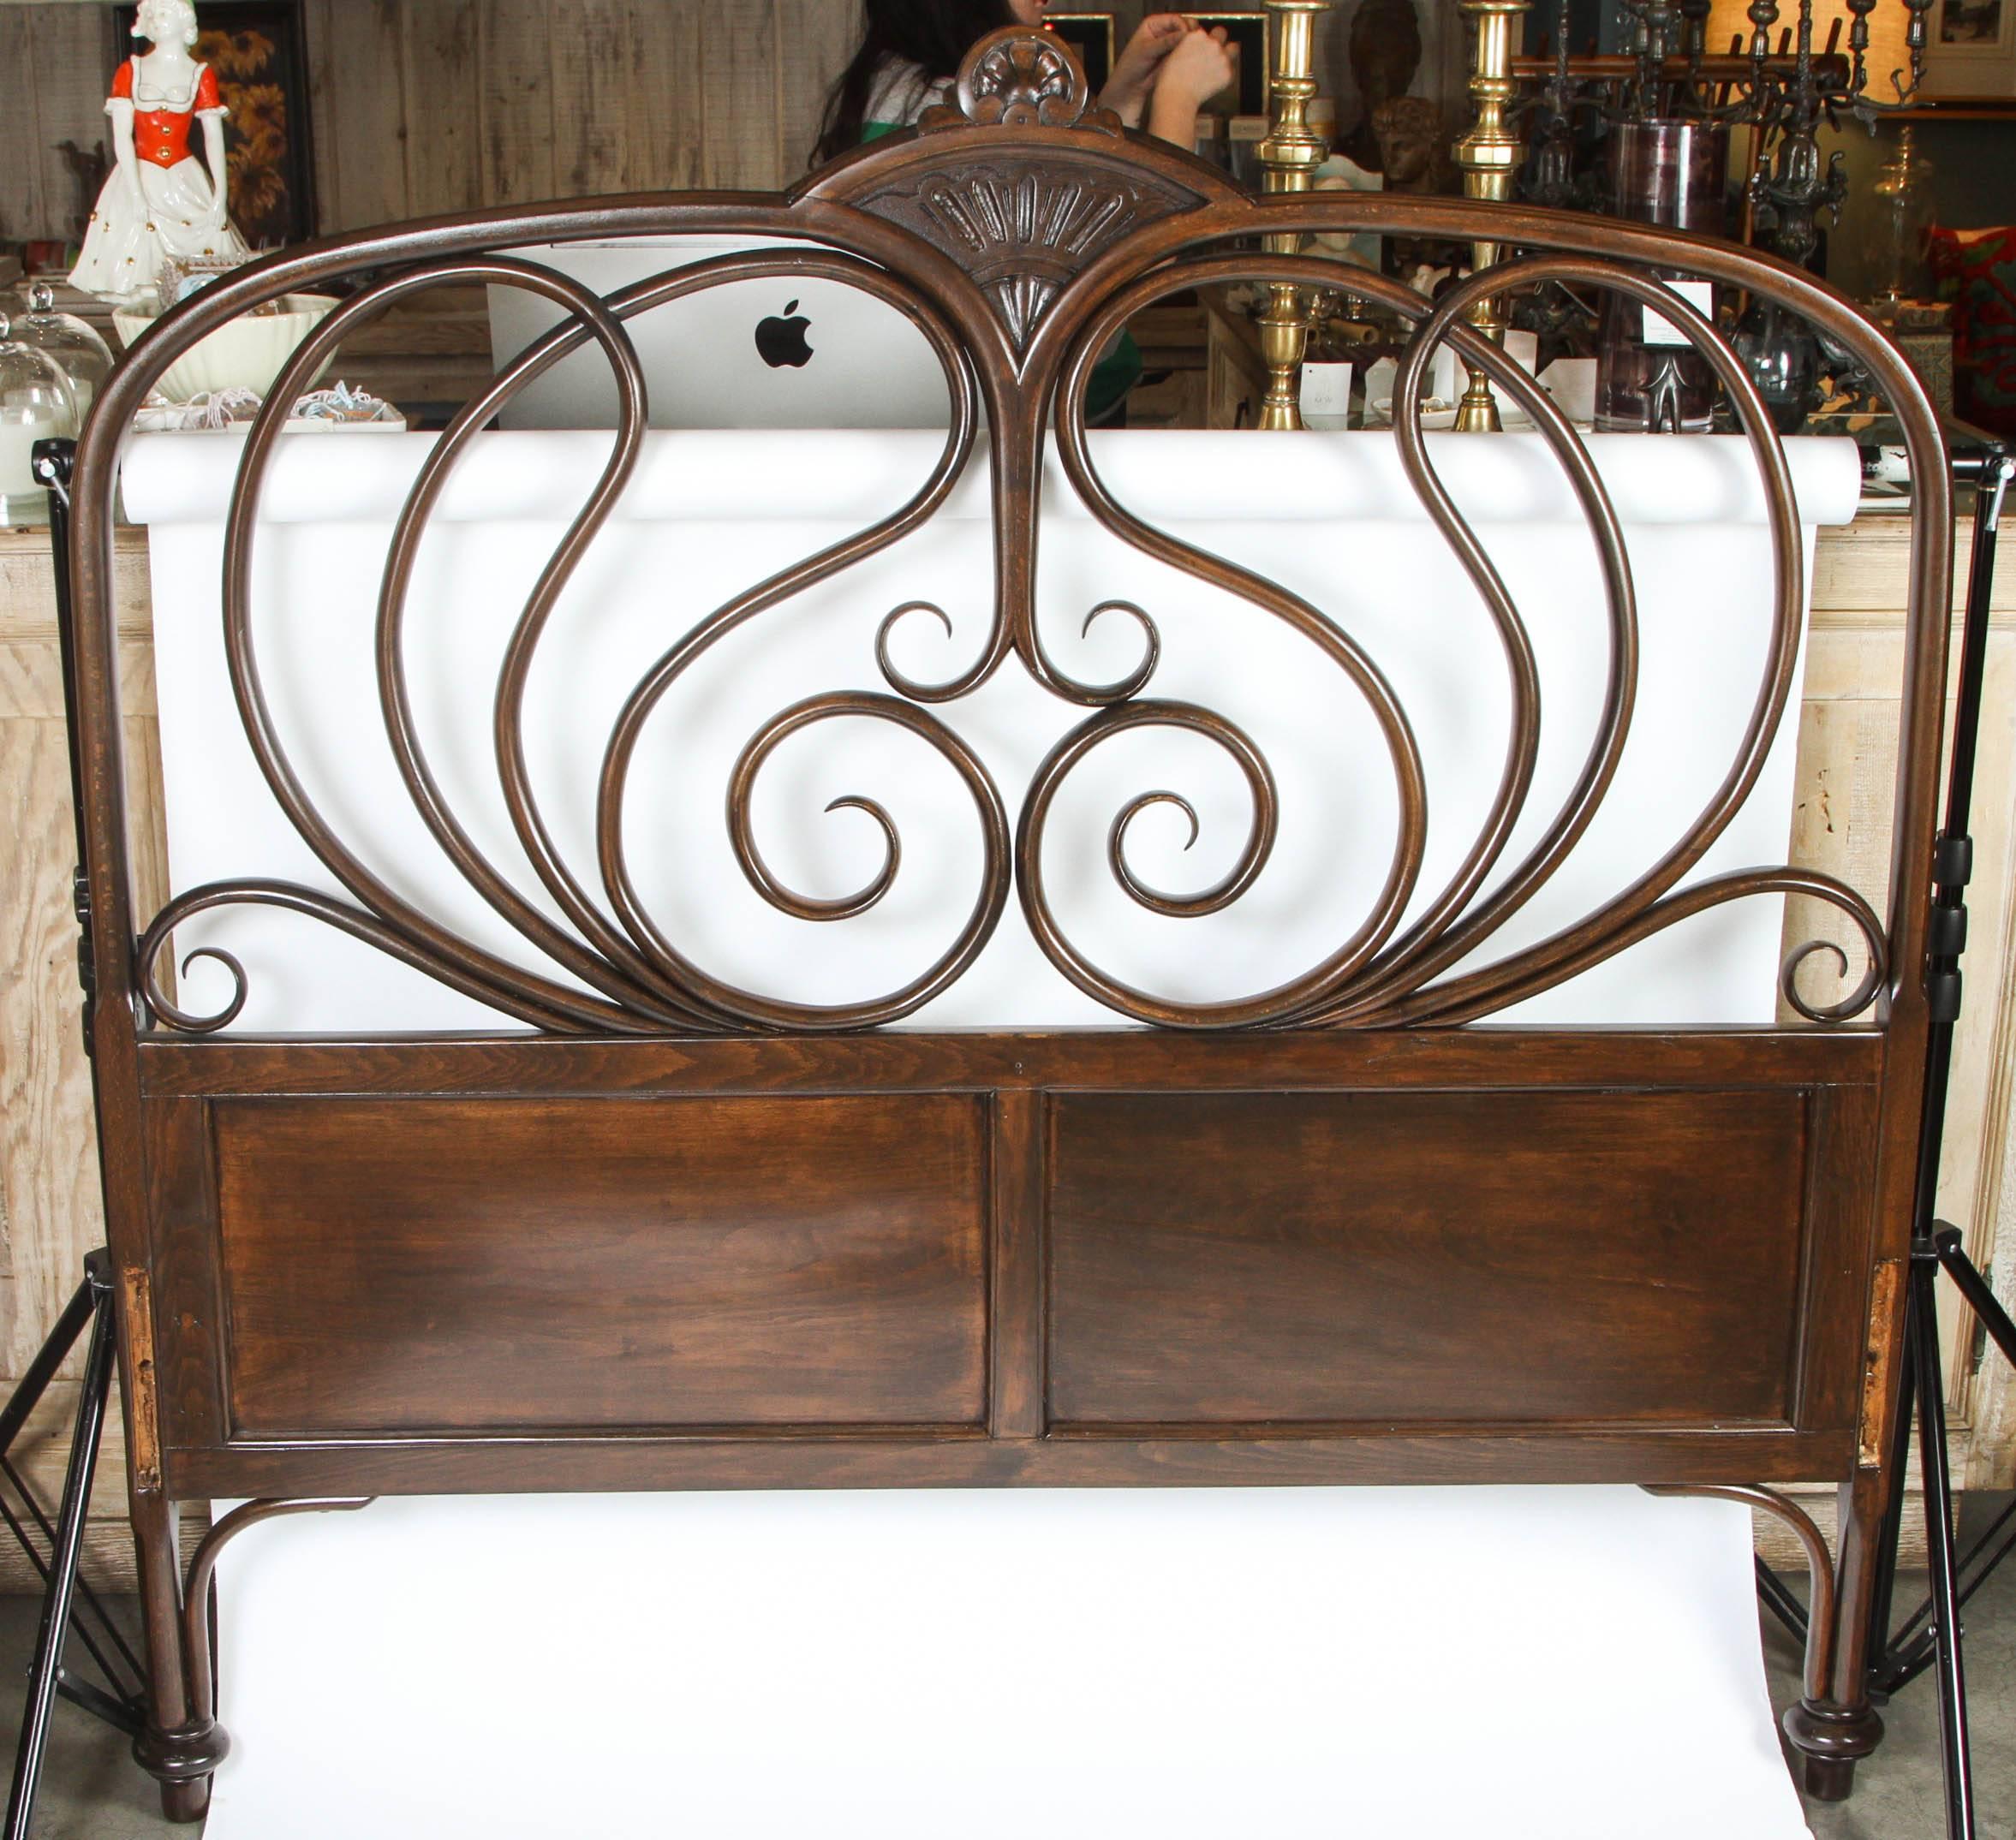 1940s bent rattan full-size headboard has a beautiful curvy design and a top centre crown detail. Headboard has grooves where there must have been side rails and a foot board at one time. Newly refinished in a dark brown stain.

 